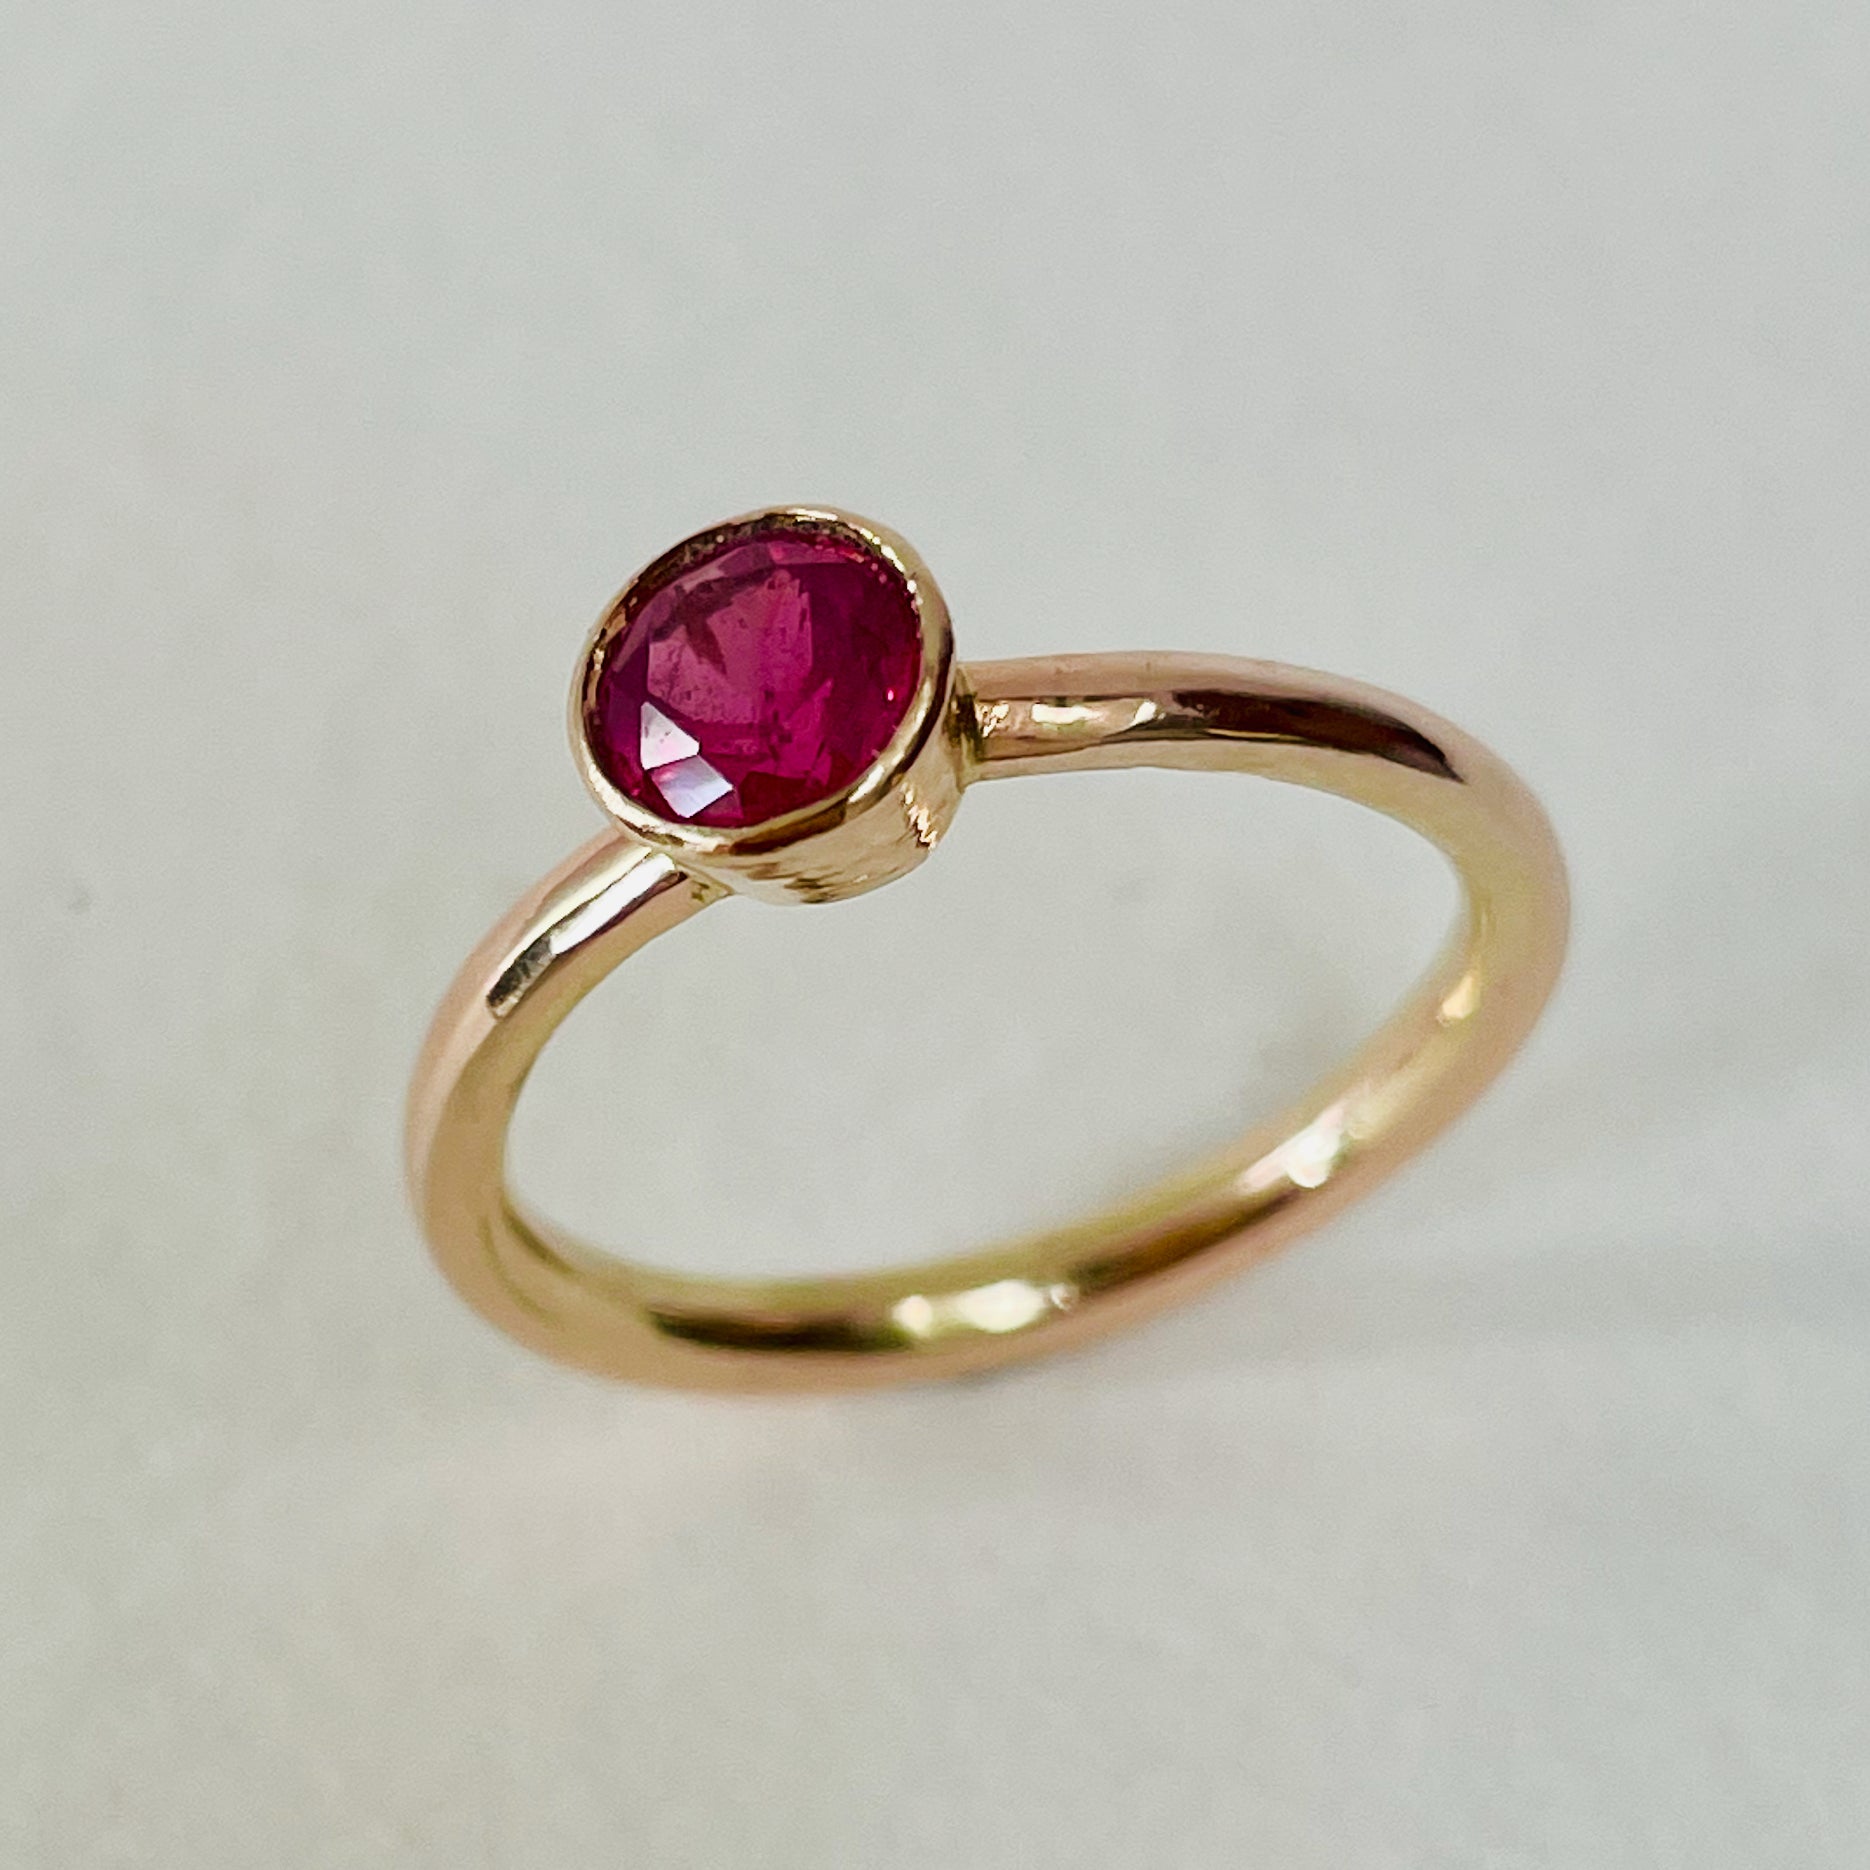 The Ruby Chalice Ring has a stunningly beautiful ethically sourced Tanzanian deep pink-red ruby, encircled with 18ct rose gold tapered chalice on a 9ct rose gold band. This totally handcrafted piece makes a wonderful gift, engagement ring or perfect encapsulation of love and joy.